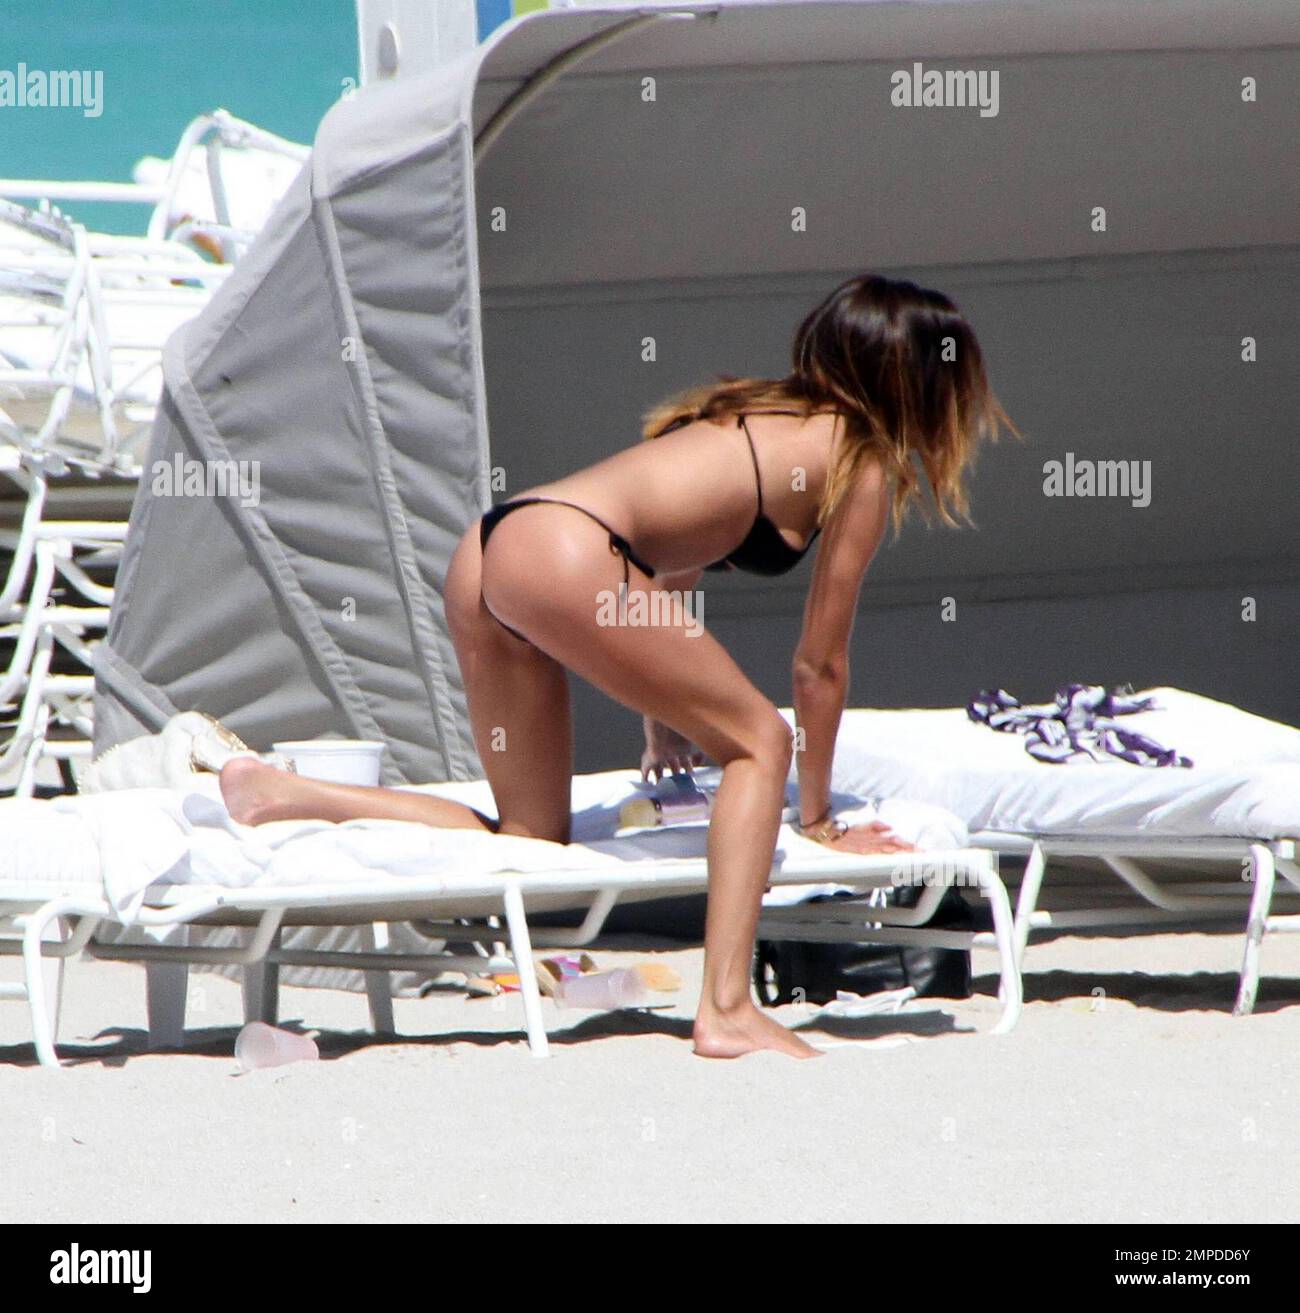 Bikini babe Belen Rodriguez appeared to have another bikini malfunction for the second day in a row. Yesterday her top had come adrift and today it seems her bottoms wouldn't behave. The Italian/Argentinian model relaxed beachside with pals and played in the surf. Miami, FL. 3/7/10.   . Stock Photo